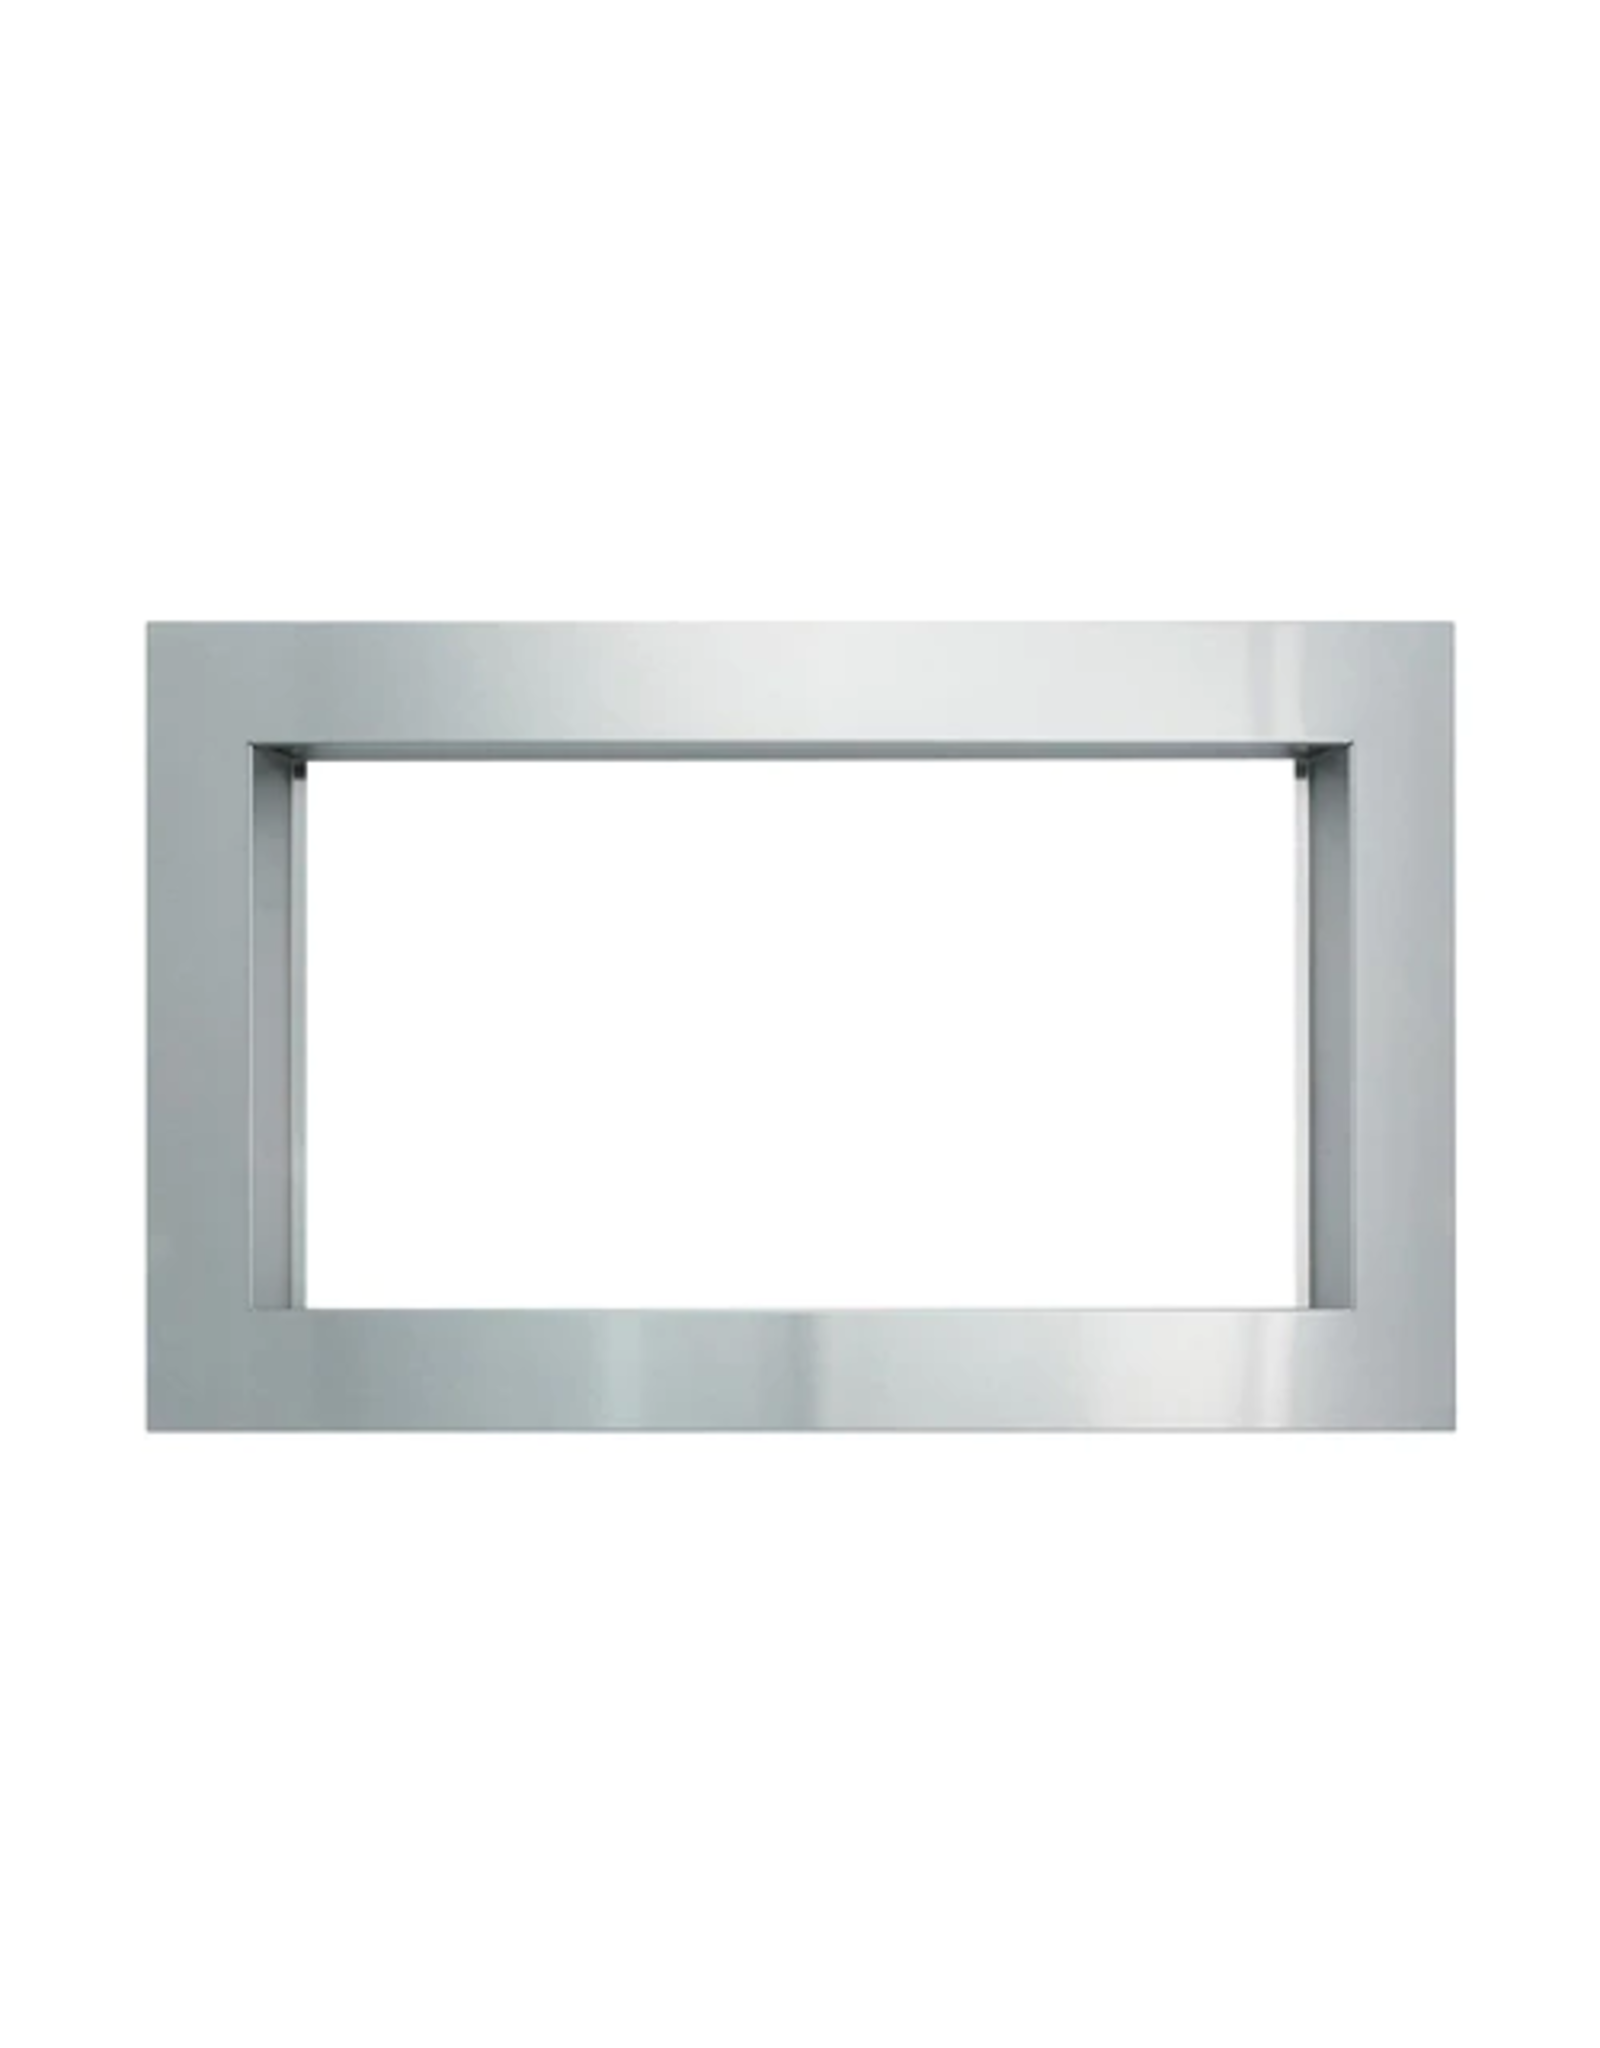 RK56S27F Sharp 27" Stainless Steel Built-in Microwave Oven Trim Kit